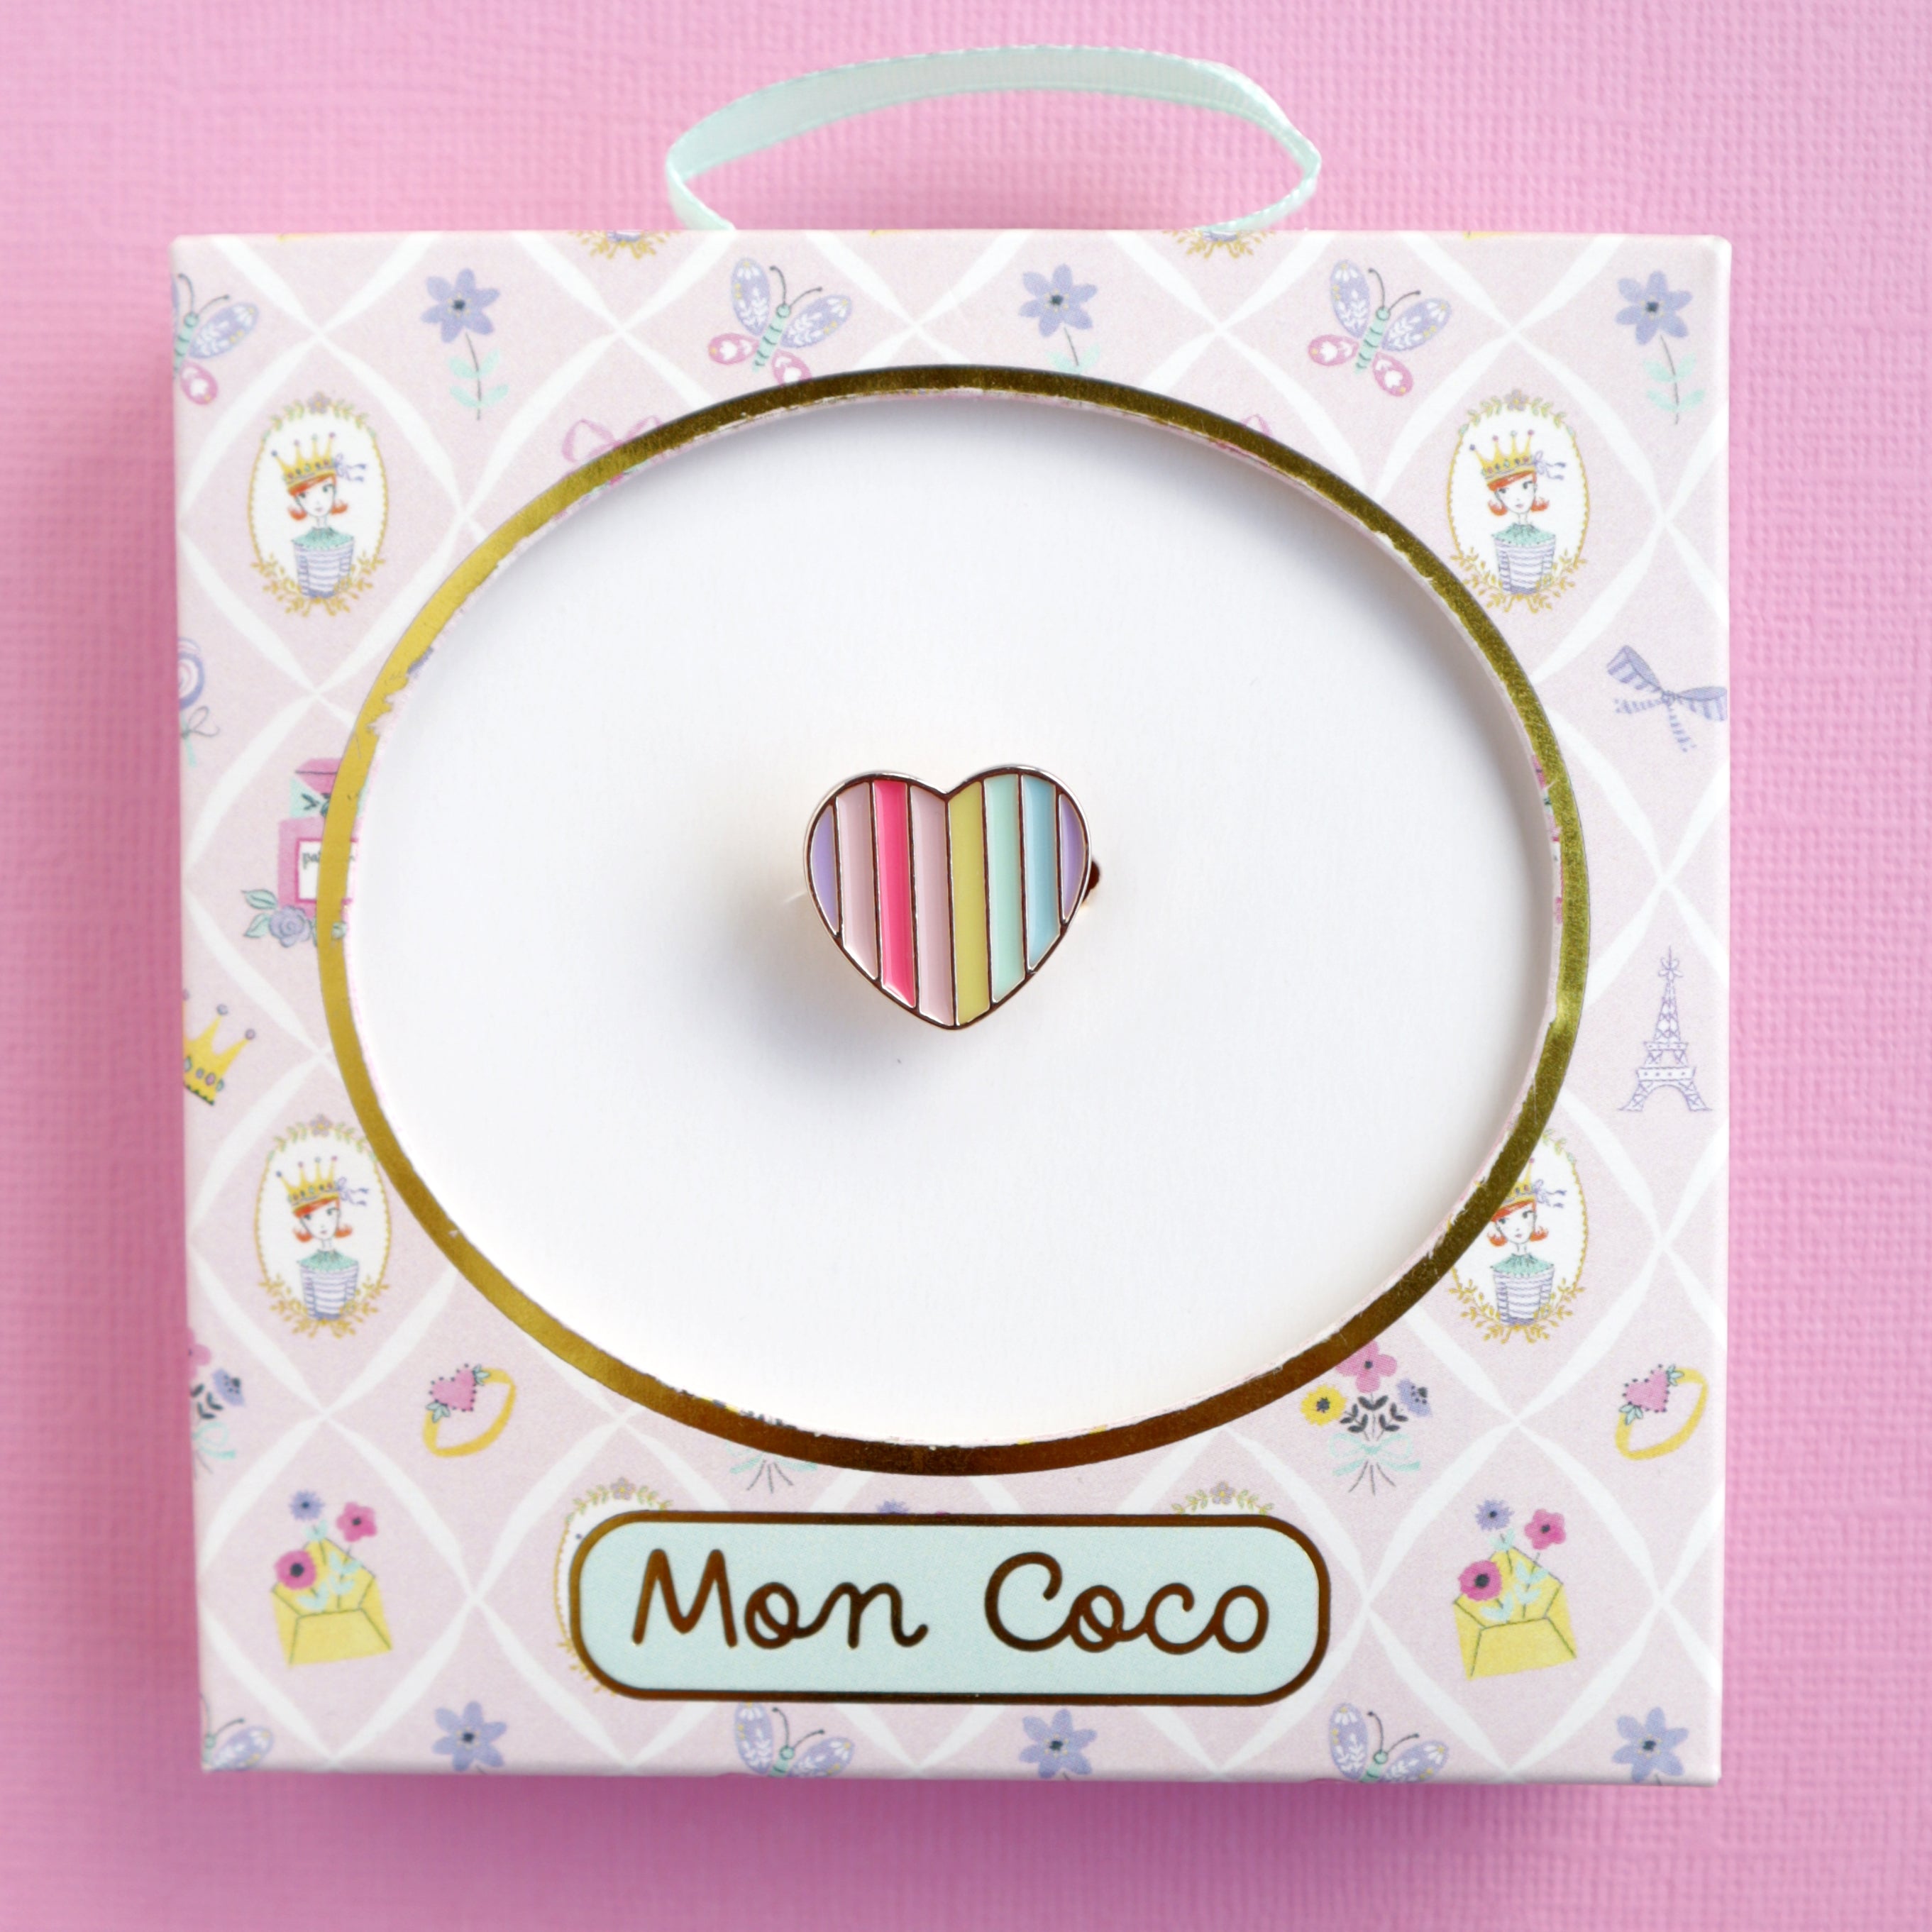 Mon Coco | Adjustable Ring - Candy Heart